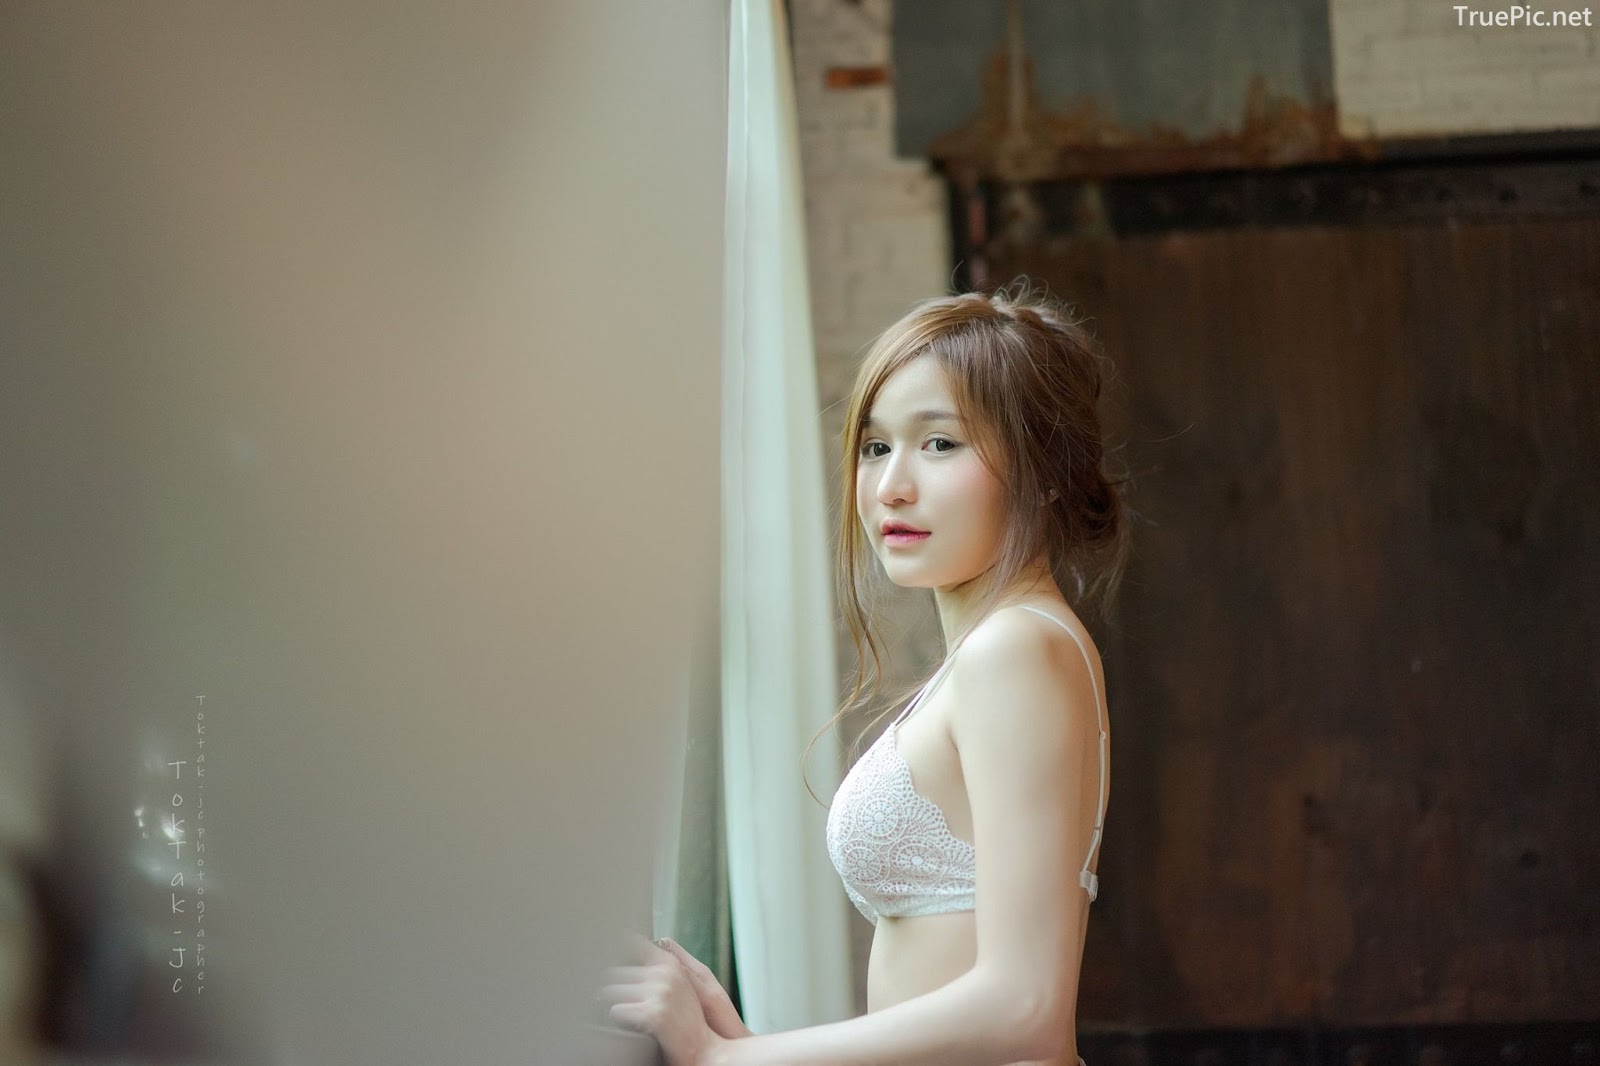 Thailand Hot Model - Patcharaporn Chaopitakwong - White Bra and Jean - TruePic.net - Picture 14